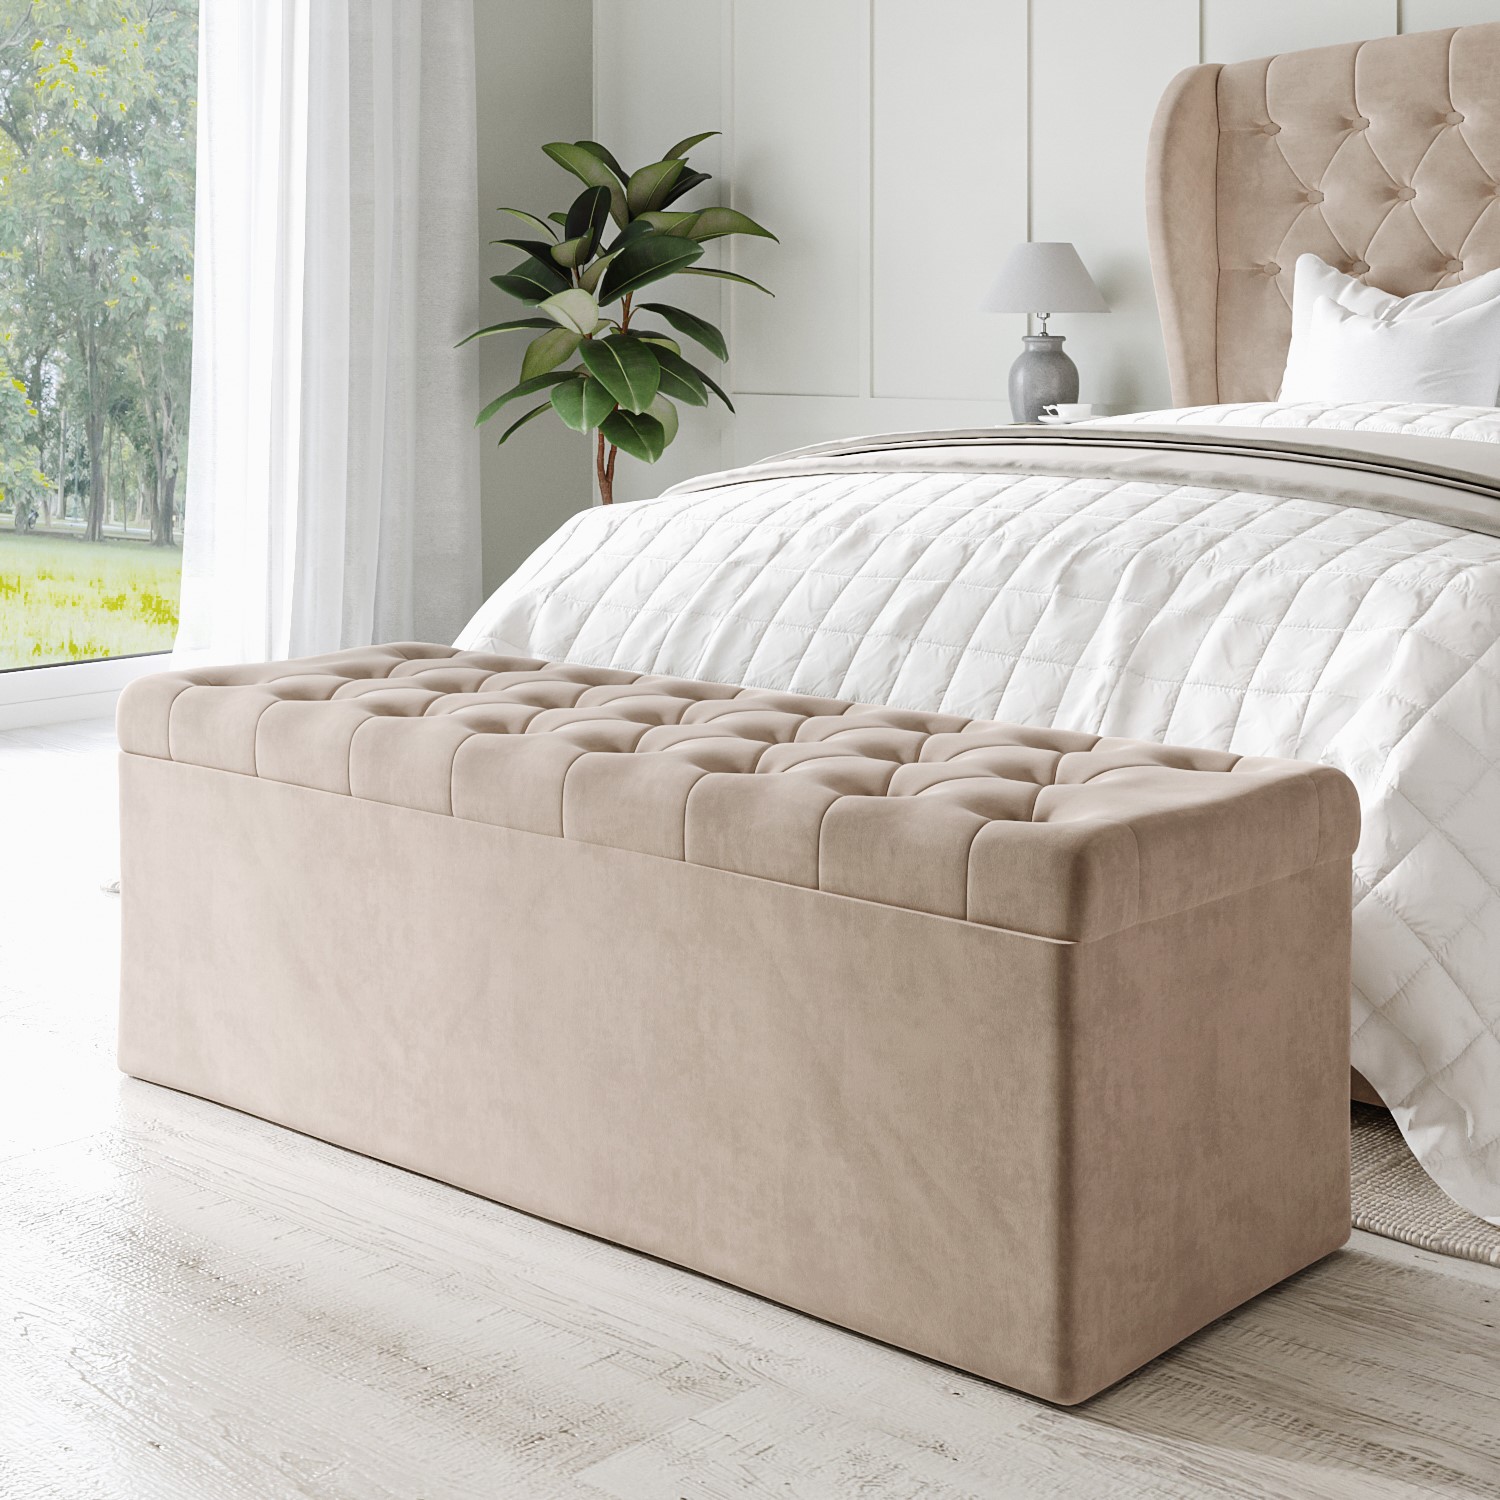 Read more about Beige velvet super king size ottoman bed with blanket box safina